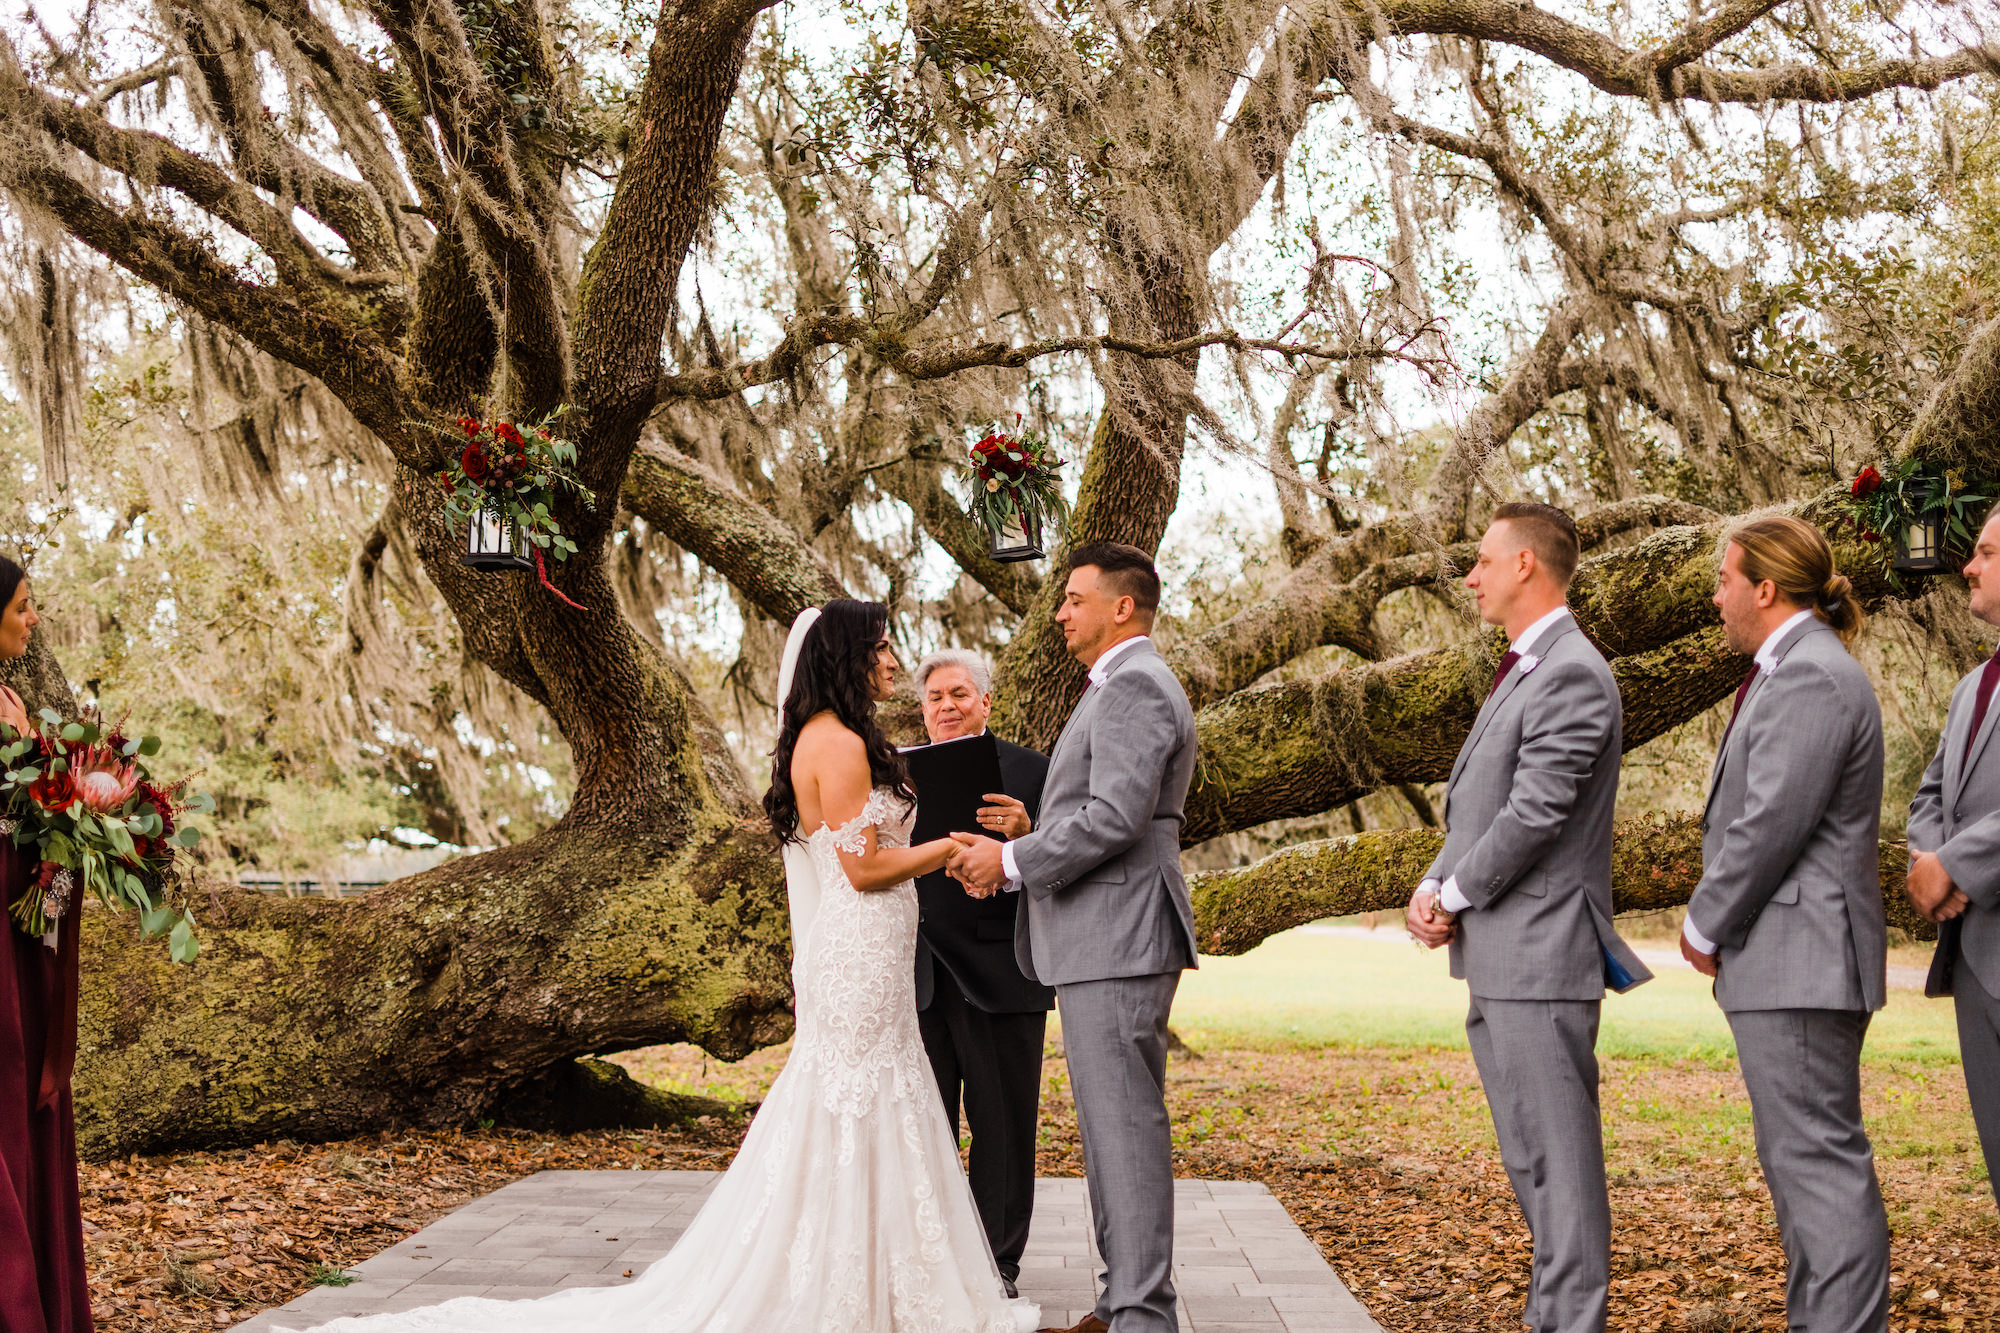 Bride and Groom Exchanging Vows | Grand Oak Tree Wedding Ceremony | Outdoor Nature Inspired Minimalist Decor